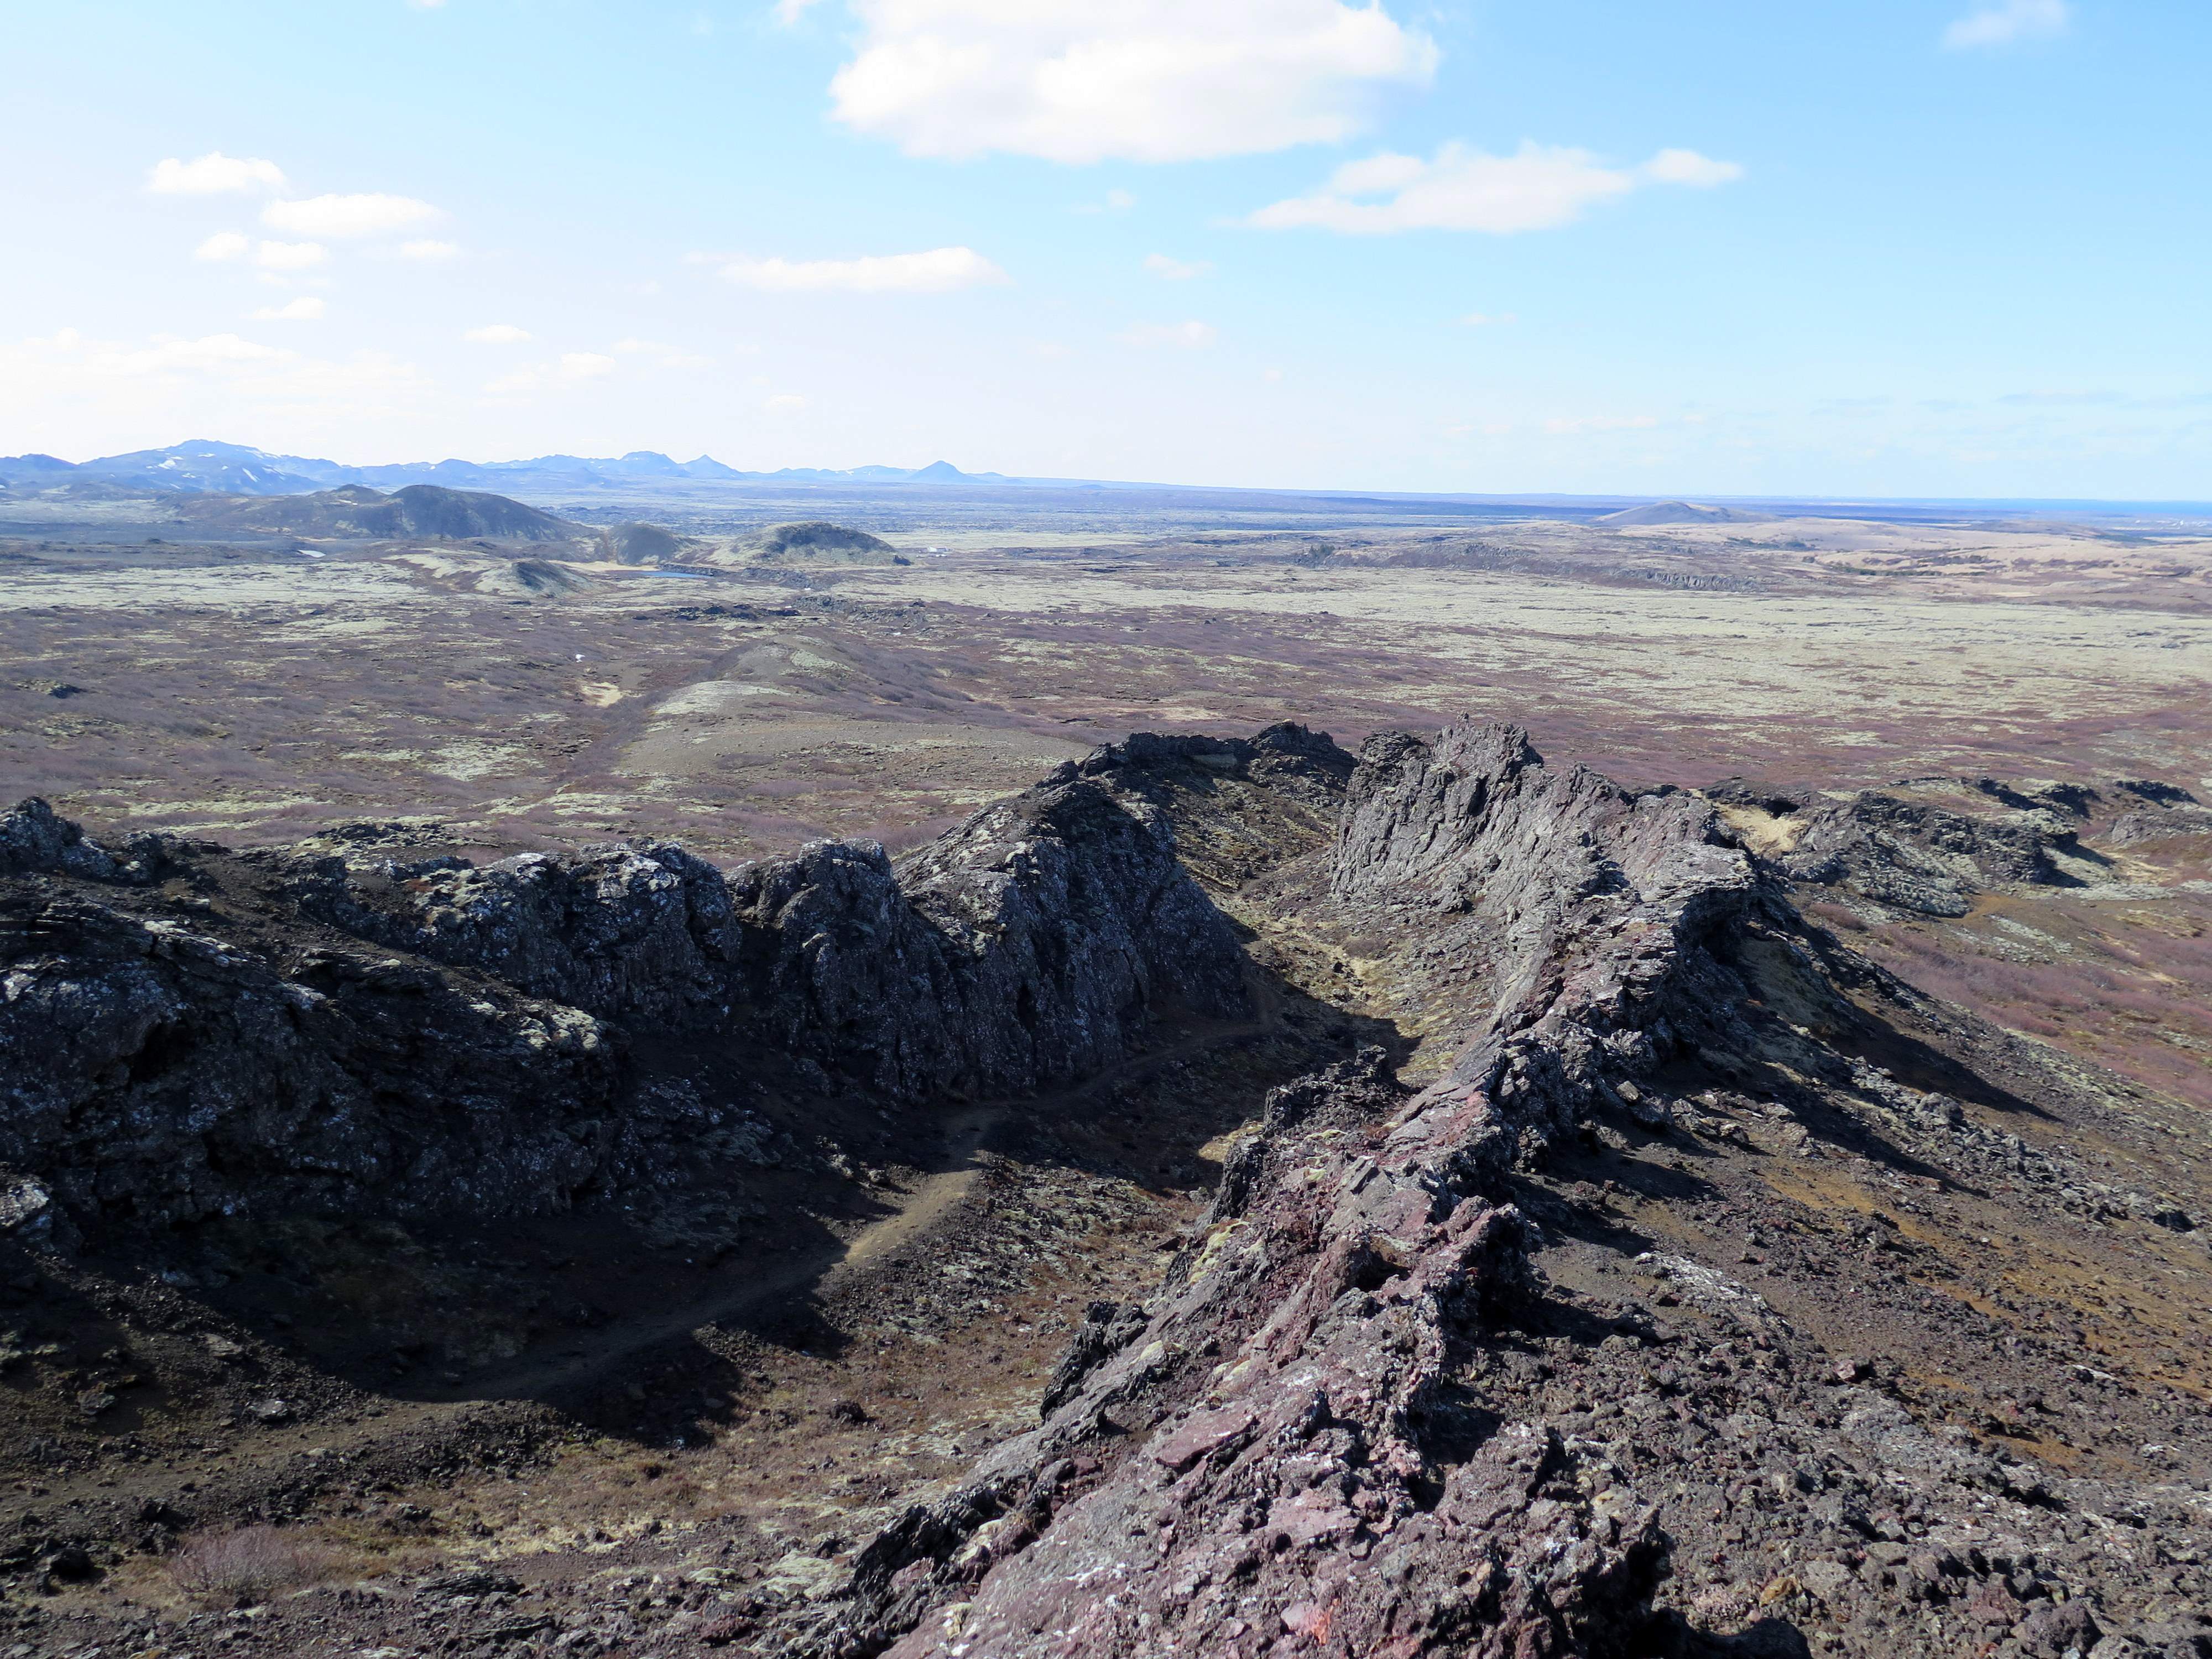 Burfellsgja lava channel and the mountains of Reykjanes in the distance.